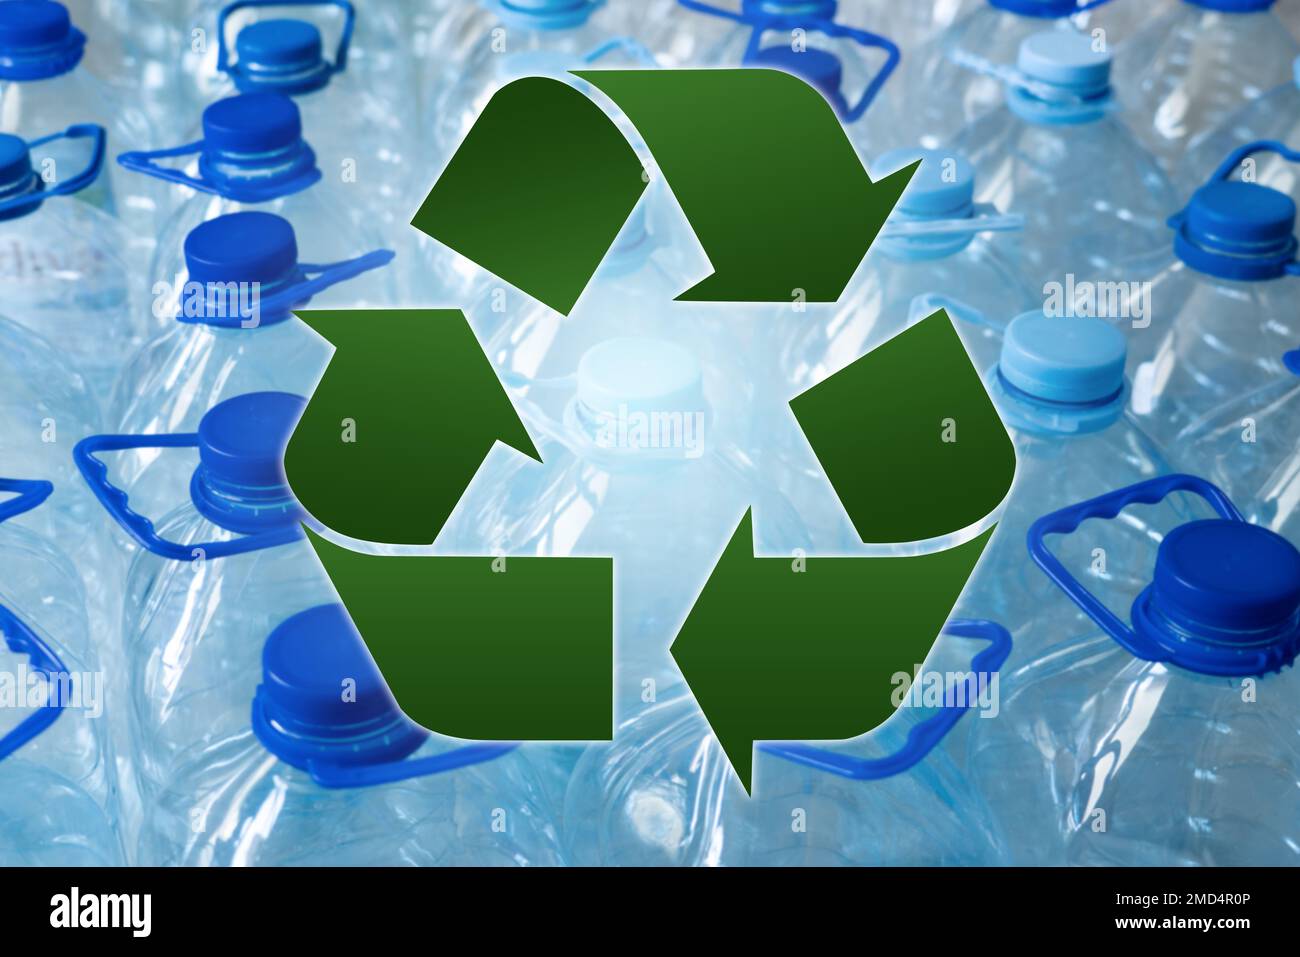 Recycle symbol on a background of plastic bottles Stock Photo